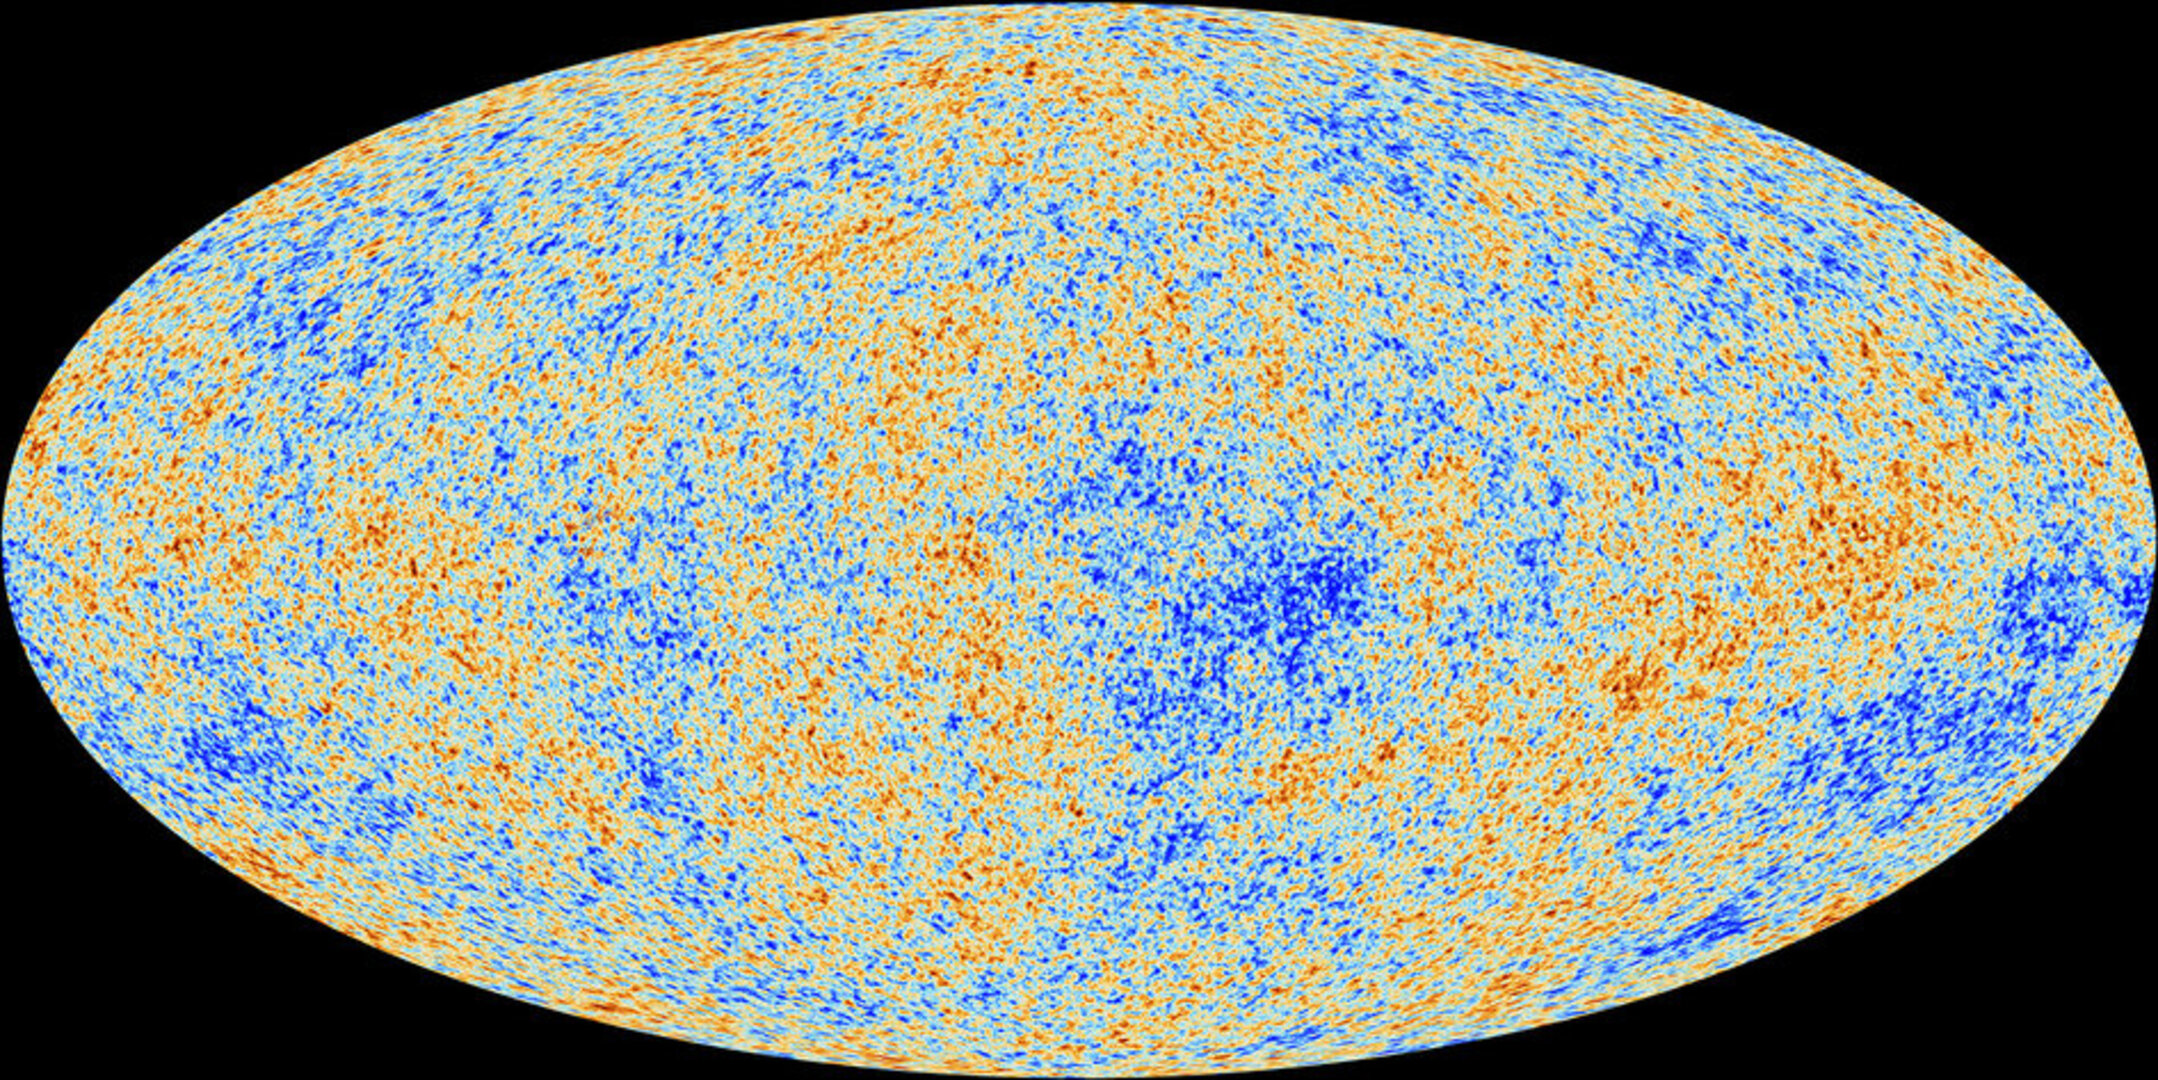 The Cosmic microwave background (CMB) as observed by Planck